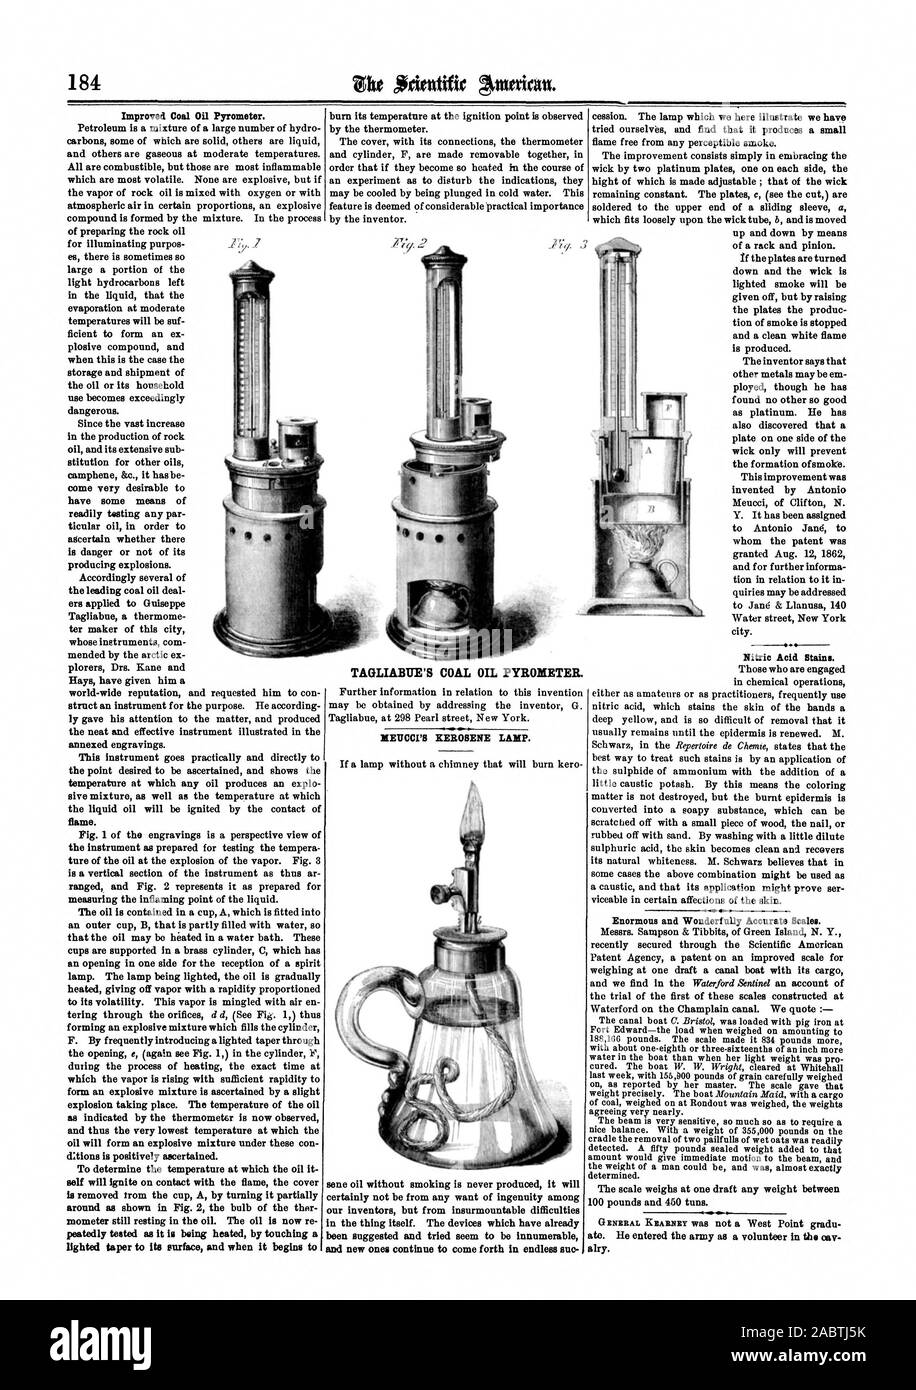 certainly not be from any want of ingenuity among our inventors but from insurmountable difficulties In the thing itself. The devices which have already been suggested and tried seem to be innumerable Nitric Acid Stains. ate. He entered the army as a volunteer in the cav alry., scientific american, 1862-09-20 Stock Photo